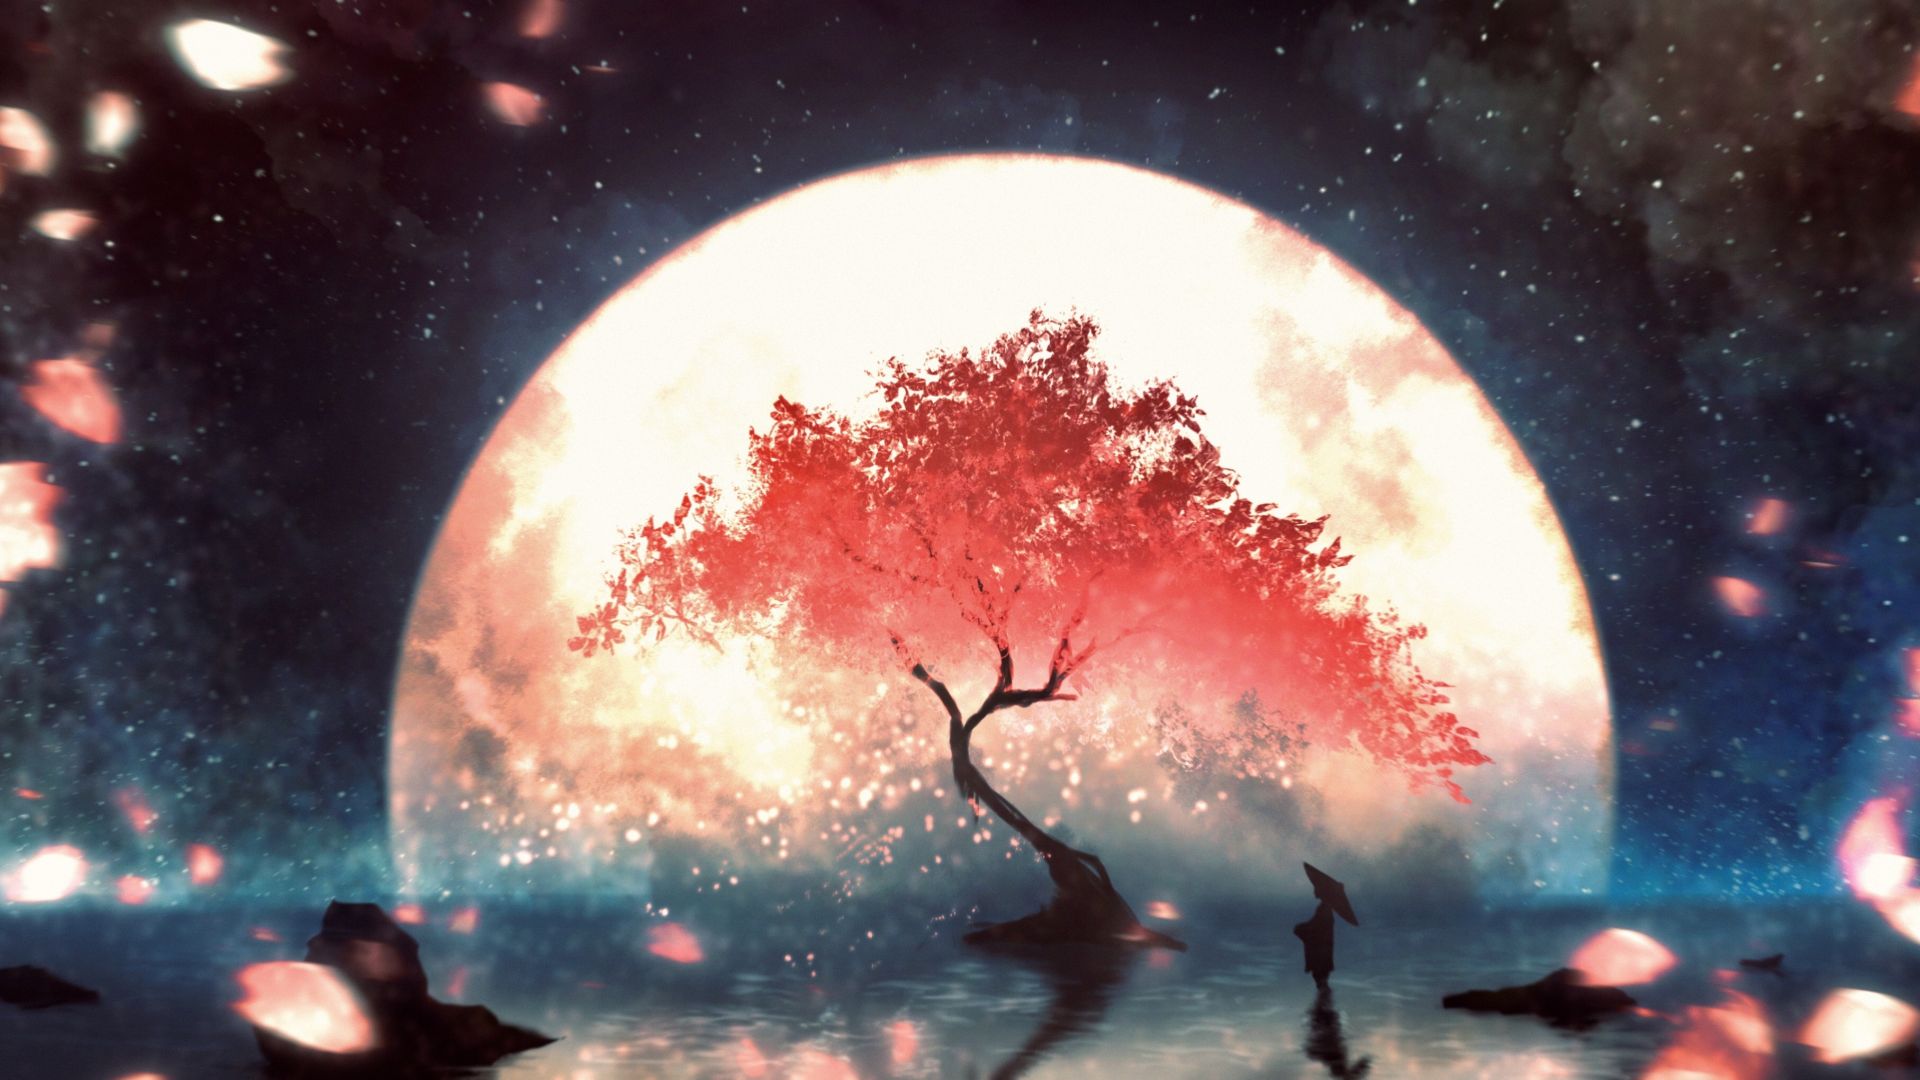 Desktop wallpaper red tree, moon light, fantasy, HD image, picture, background, a32312